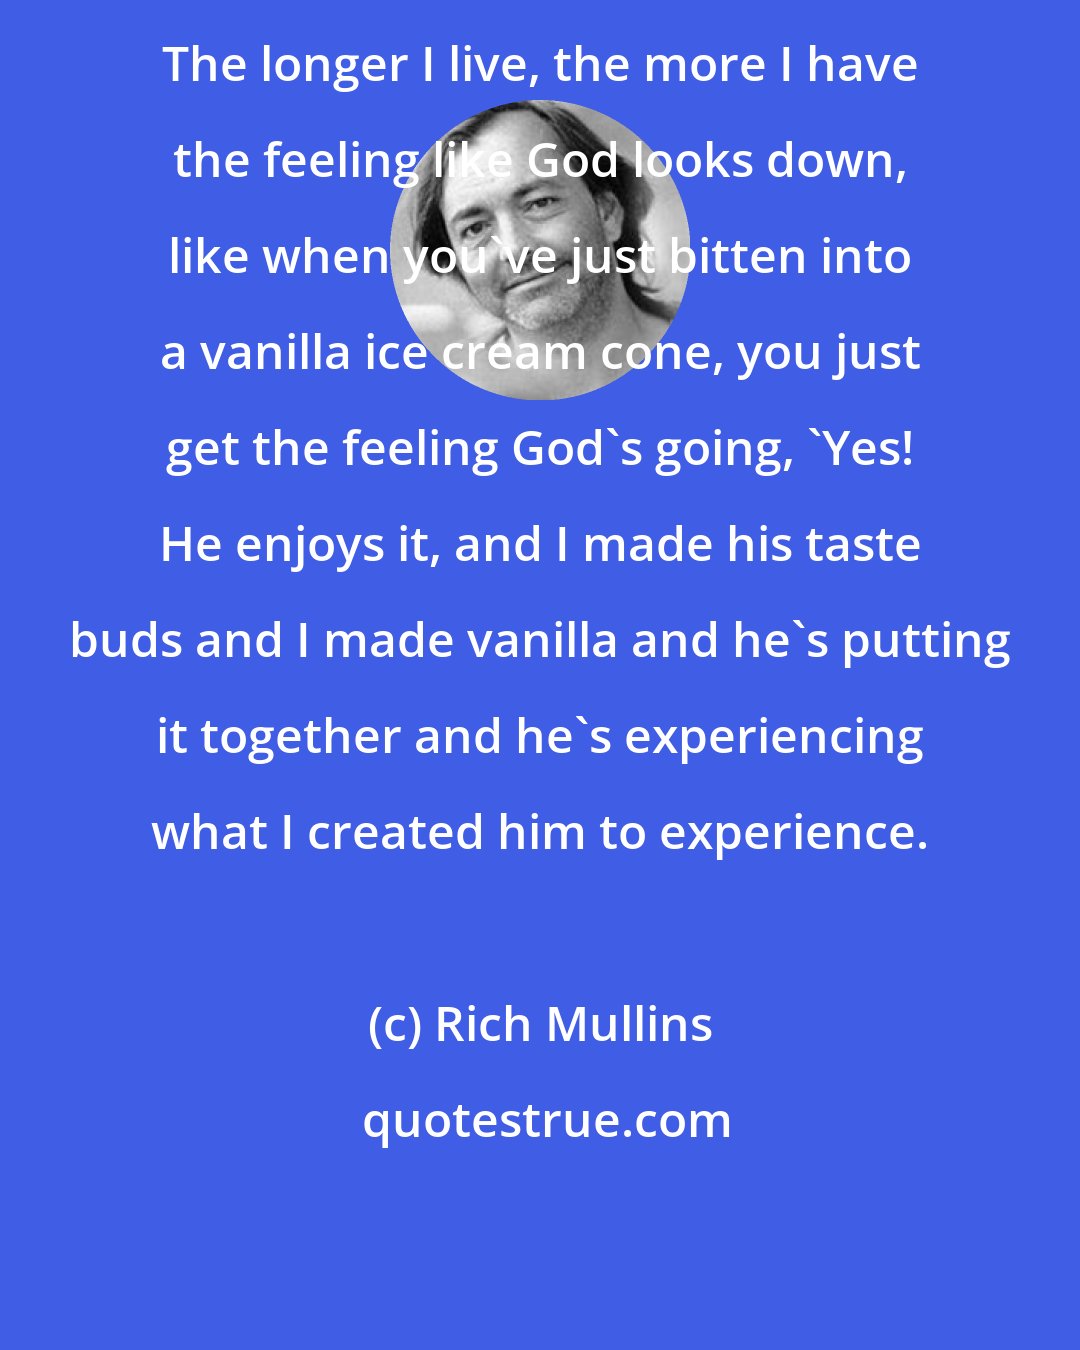 Rich Mullins: The longer I live, the more I have the feeling like God looks down, like when you've just bitten into a vanilla ice cream cone, you just get the feeling God's going, 'Yes! He enjoys it, and I made his taste buds and I made vanilla and he's putting it together and he's experiencing what I created him to experience.